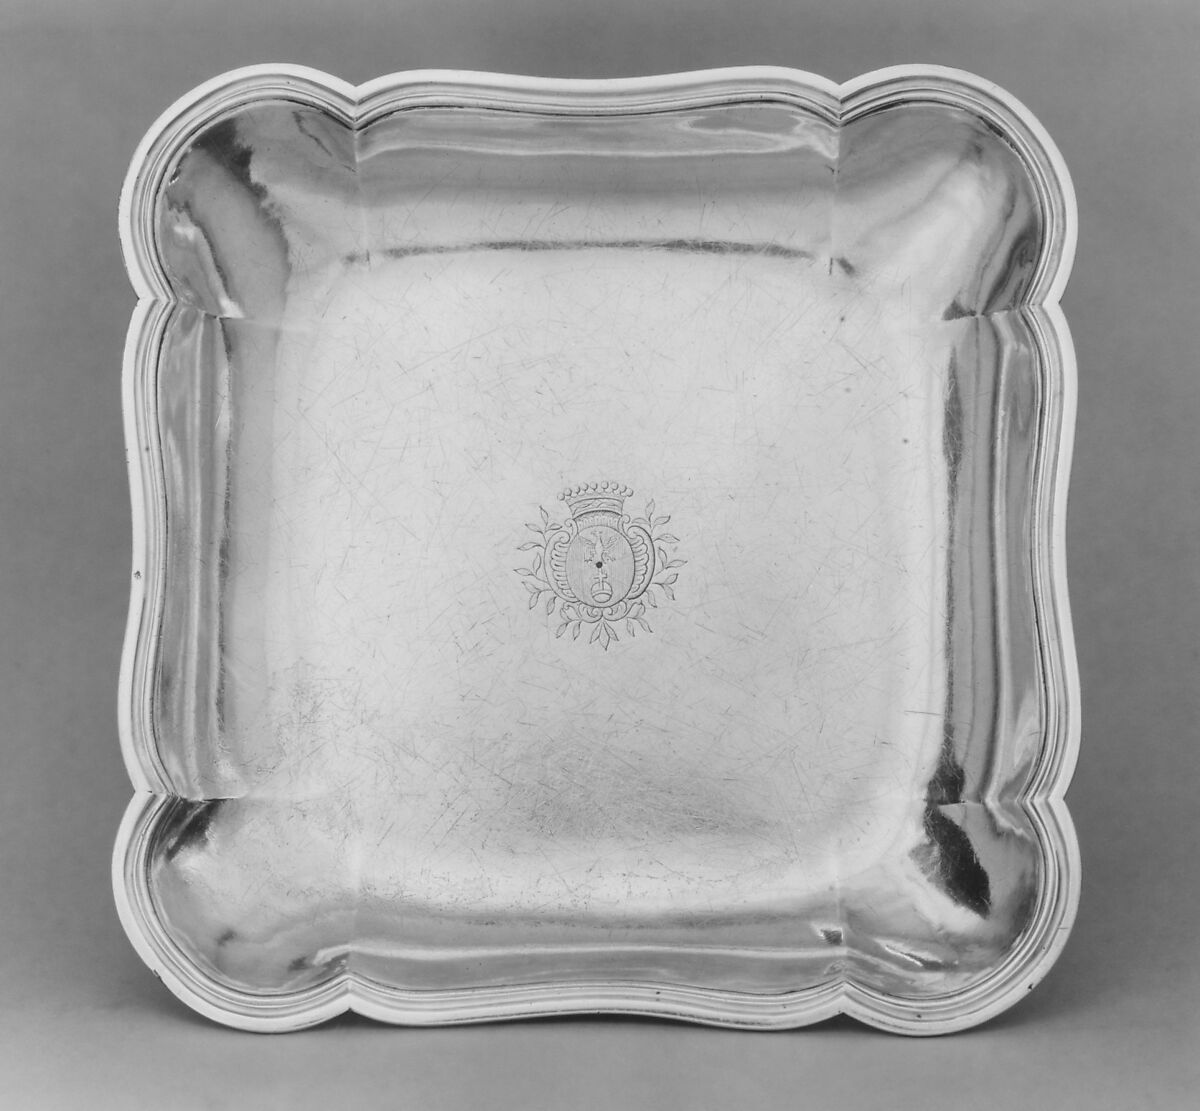 Dish, Paul-David Bazille (1740–1793, master 1766), Silver, French, Montpellier 